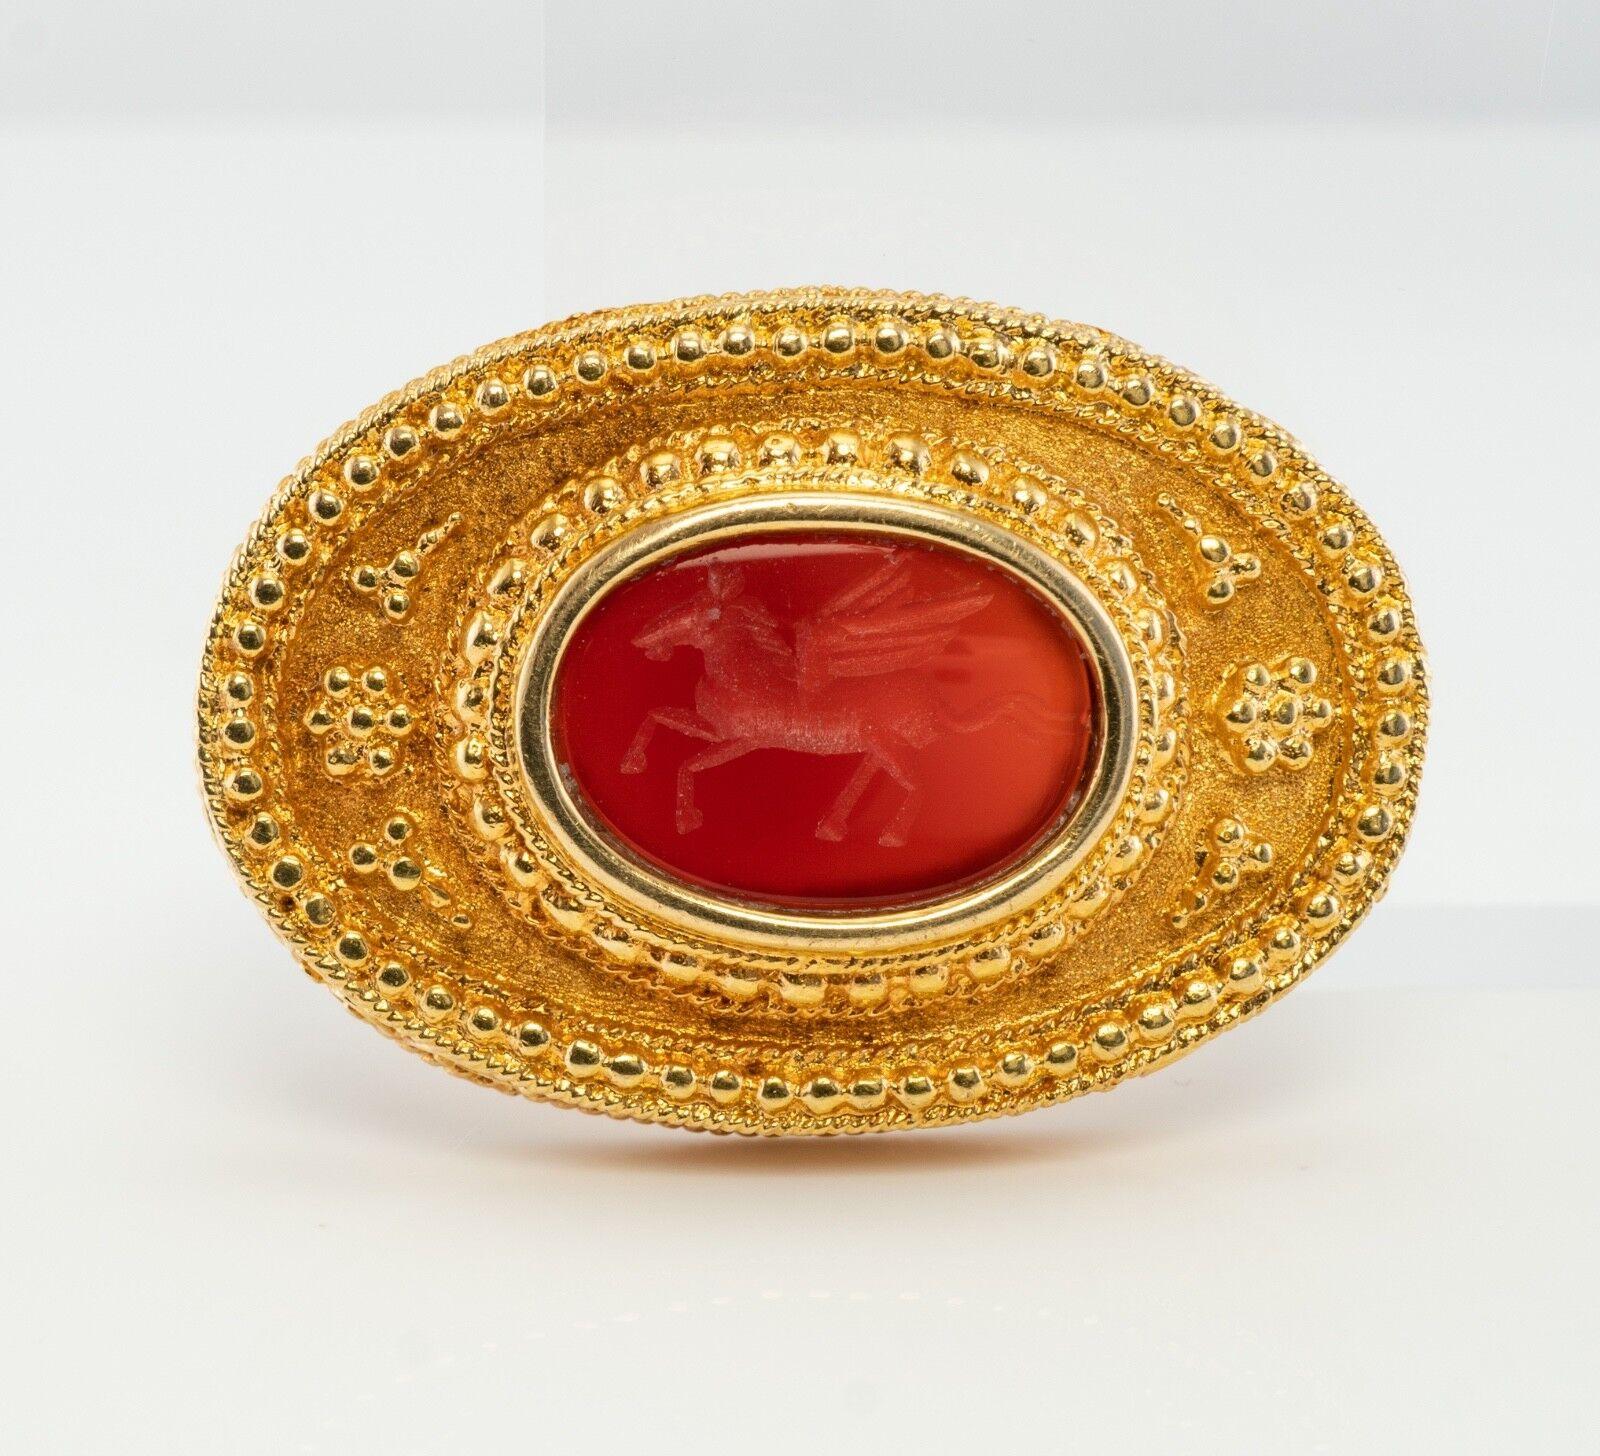 Pegasus Pendant Brooch Carnelian Cameo Ancient Greek Mythology 18K Gold

This gorgeous estate Etruscan style piece is finely crafted in solid 18K gold. It is also stamped with a hallmark.The center carnelian intaglio cameo depicts a Pegasus horse.